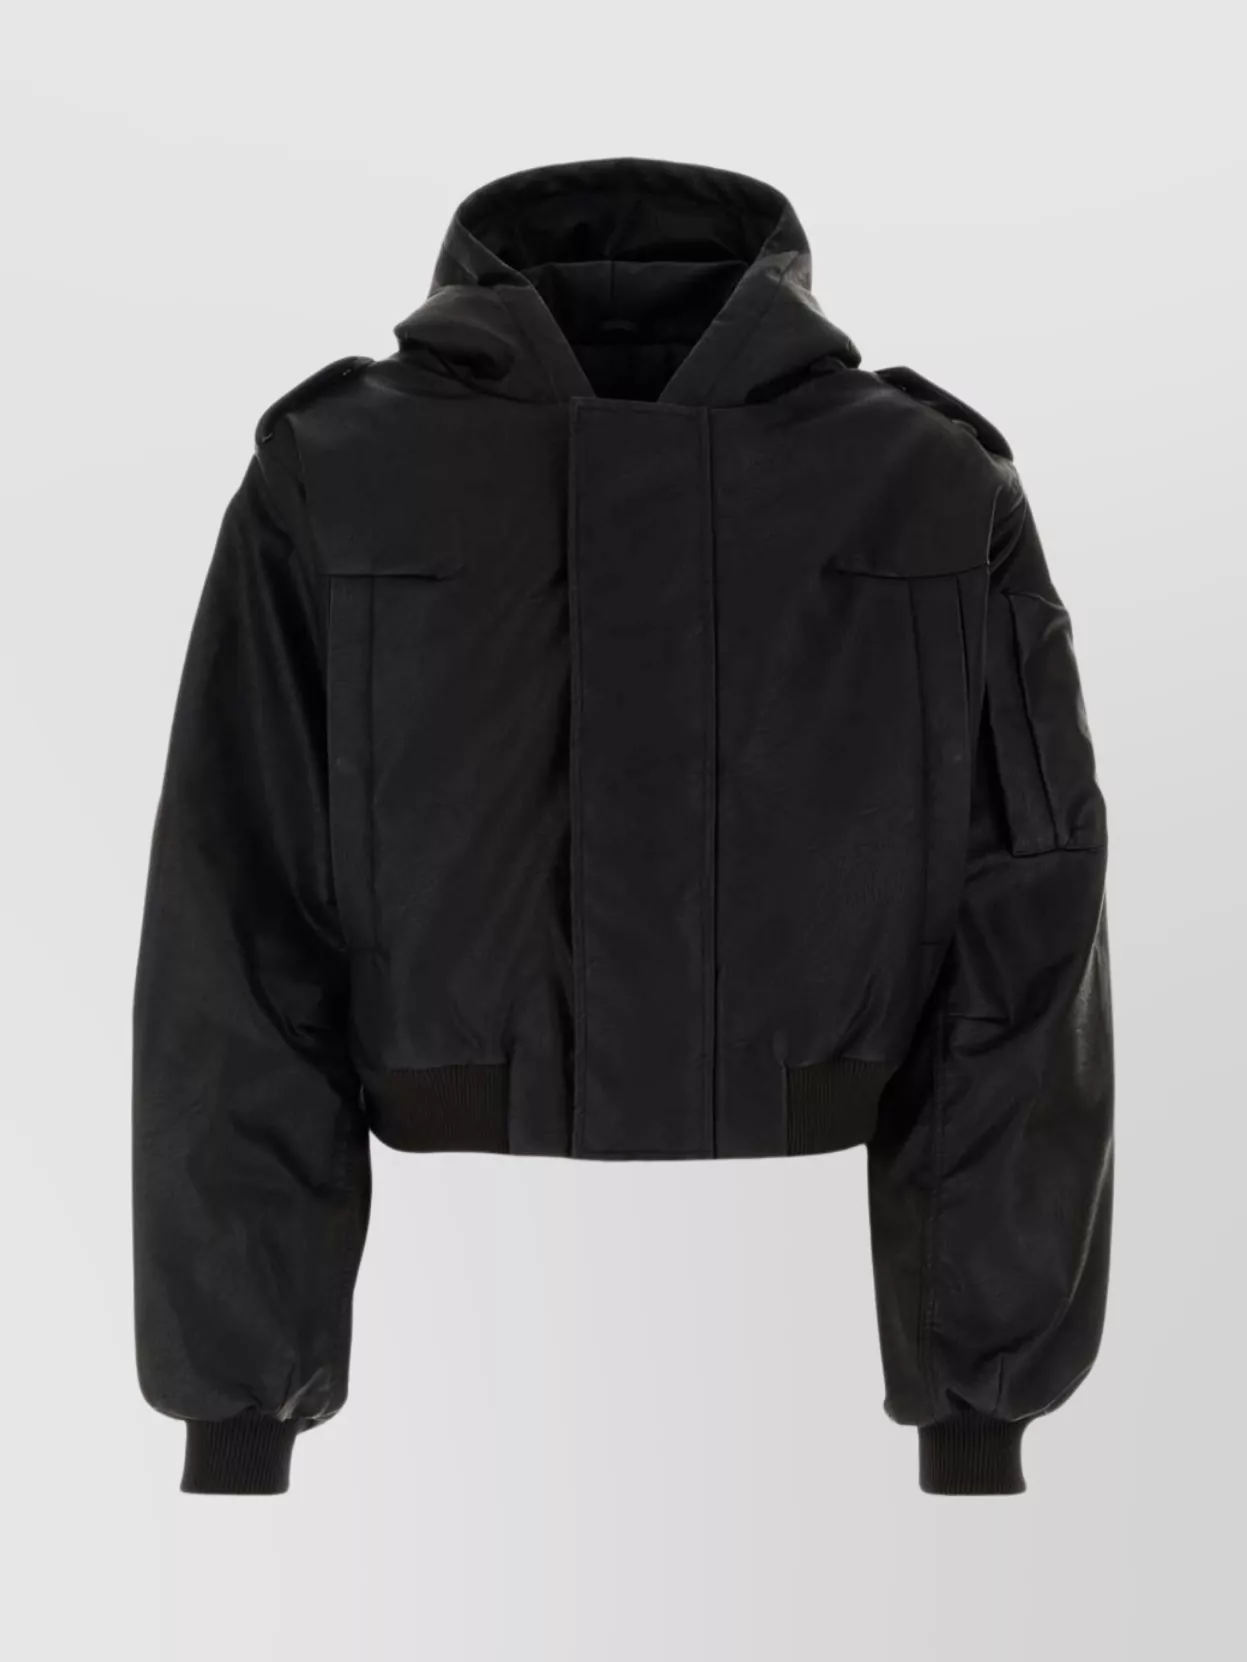 Shop Entire Studios Bomber Jacket With Hood And Elasticized Cuffs In Black